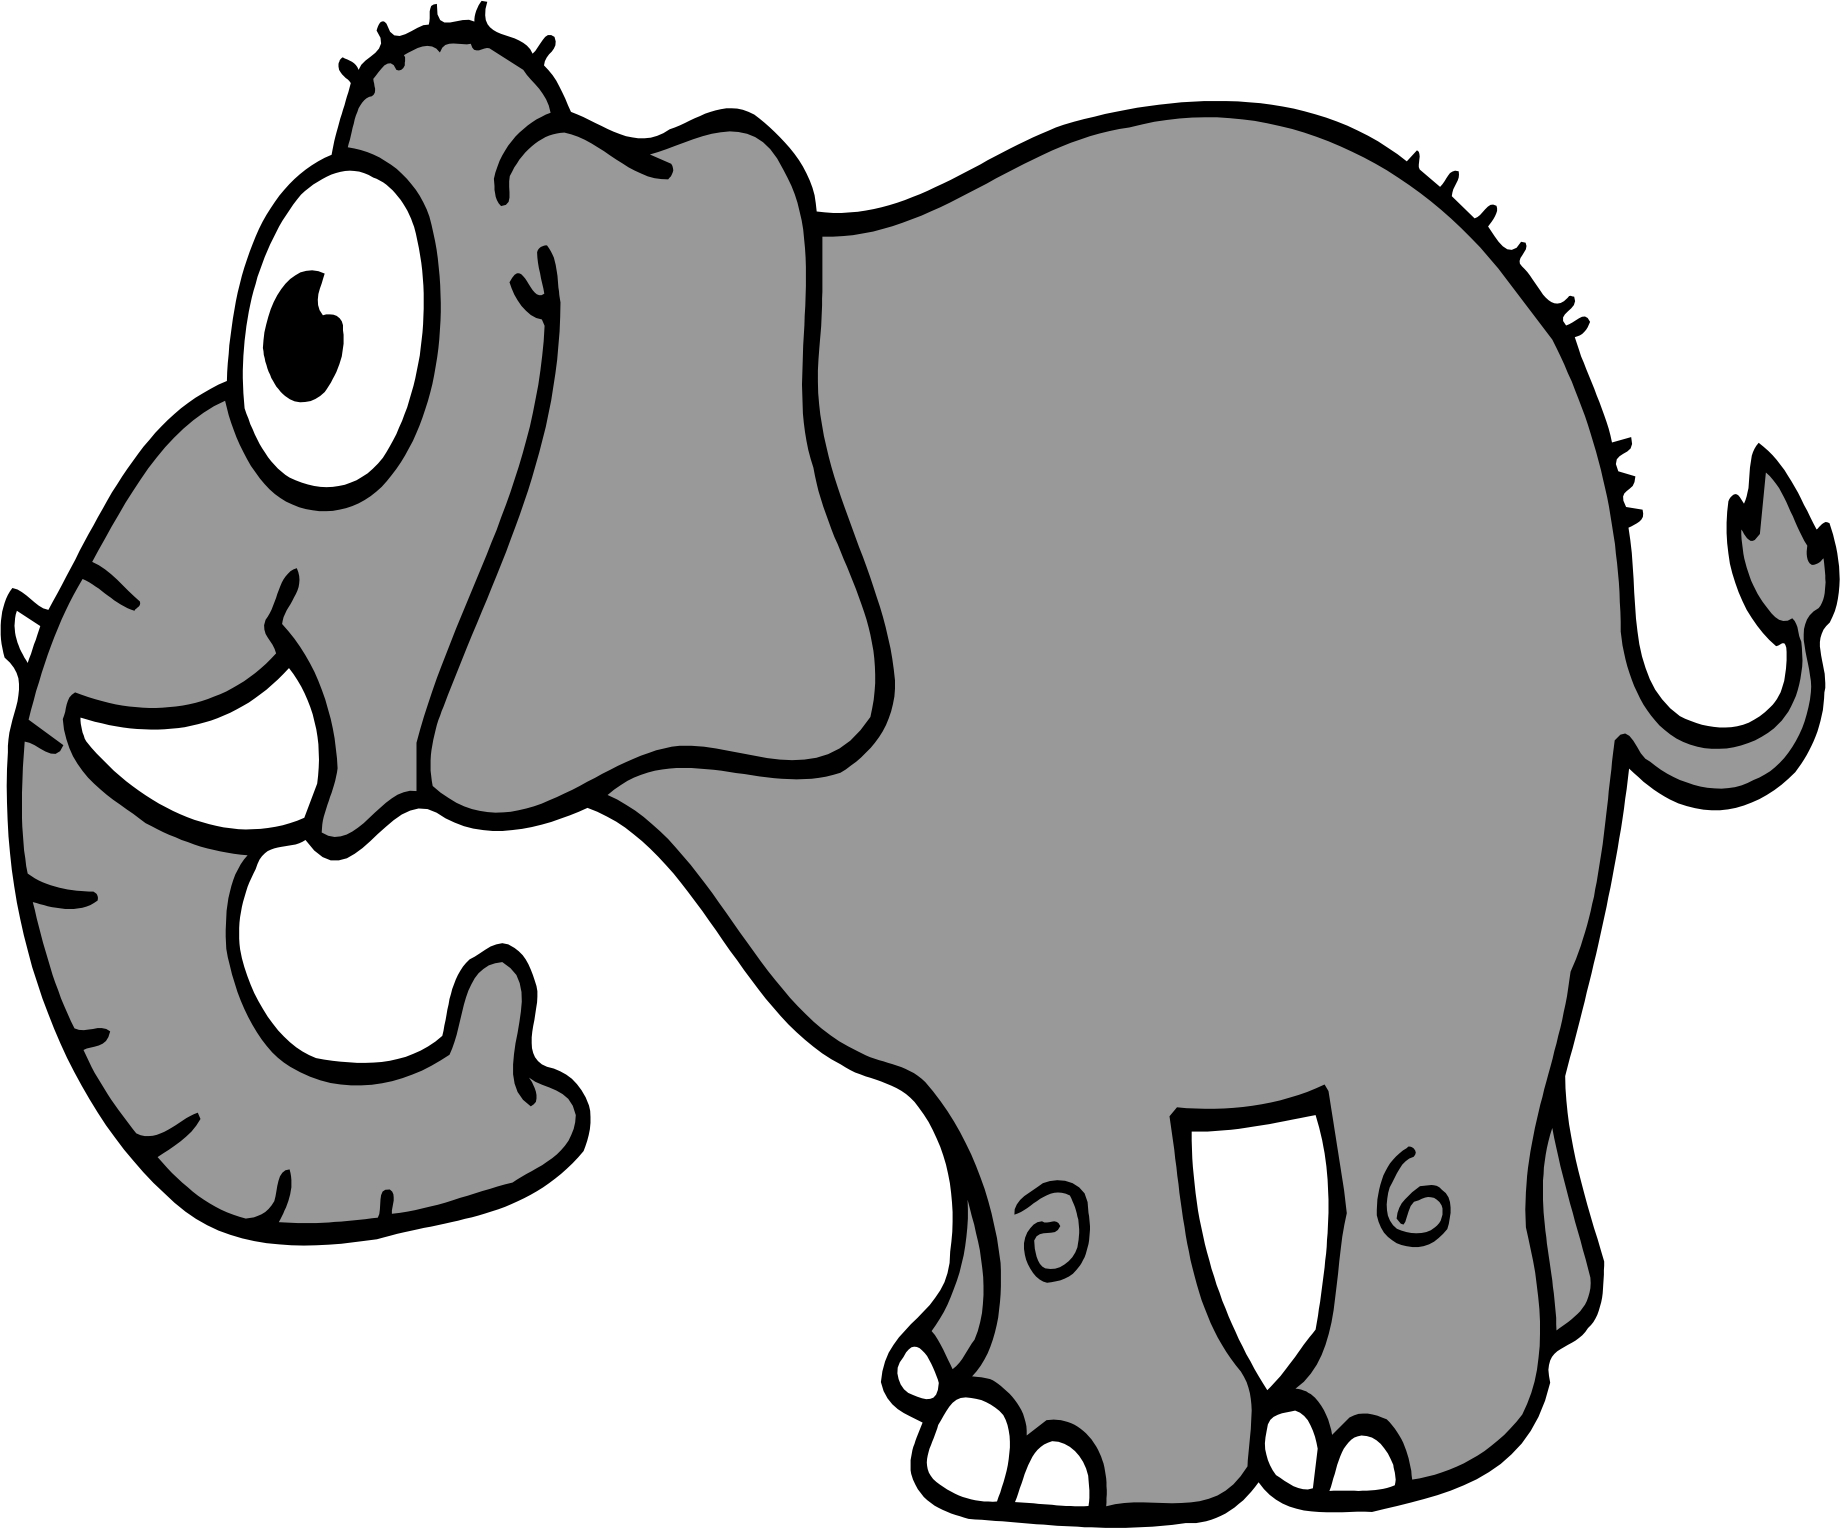 cartoon pictures images photos : Elephant Cartoon Pictures Images ...